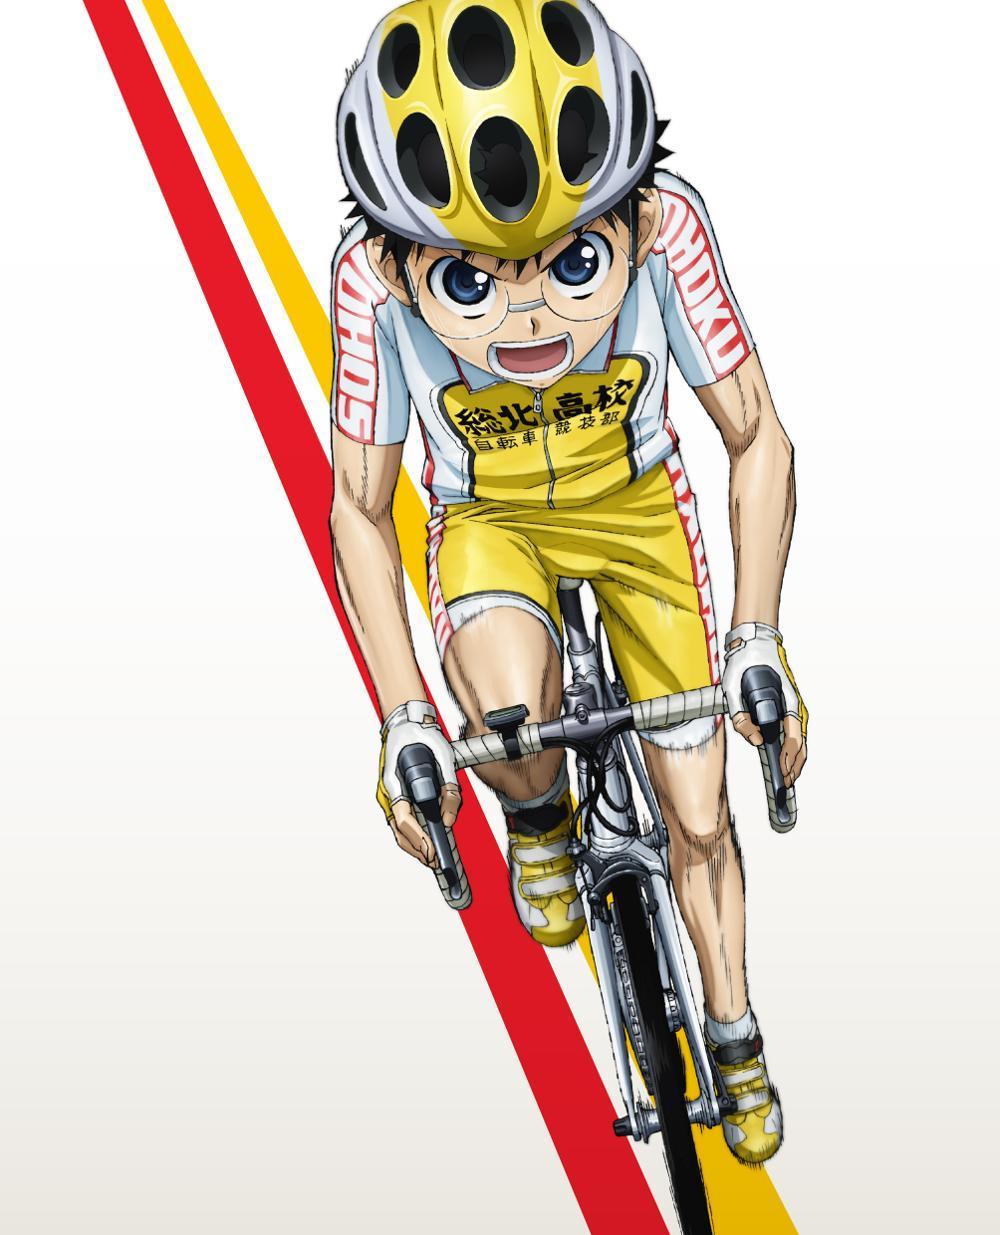 This summer, Japanese anime fans are going cycling